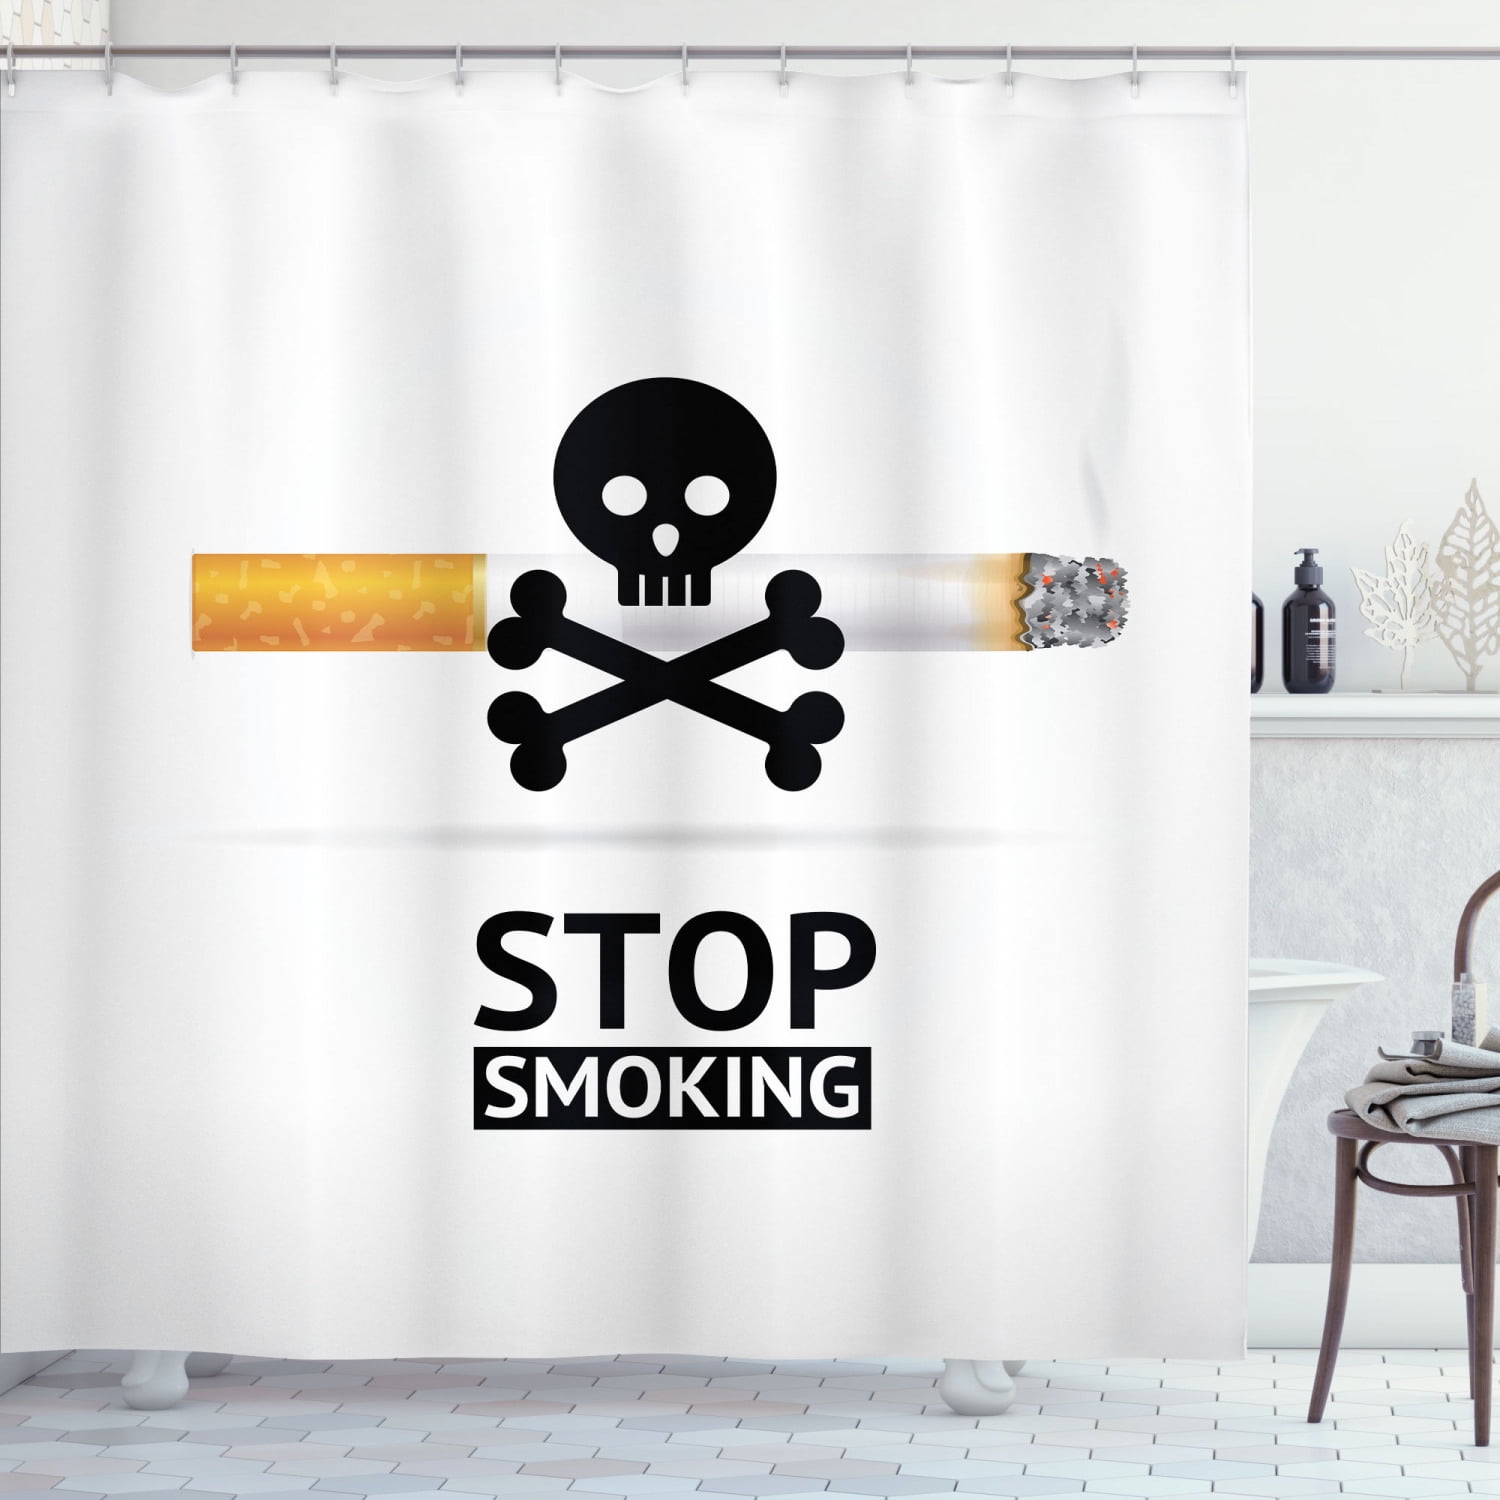 Smoking Shower Curtain, Danger Symbol About Health and Cigarette on Background, Fabric Bathroom Set with Off White Charcoal Grey, by Ambesonne - - Walmart.com